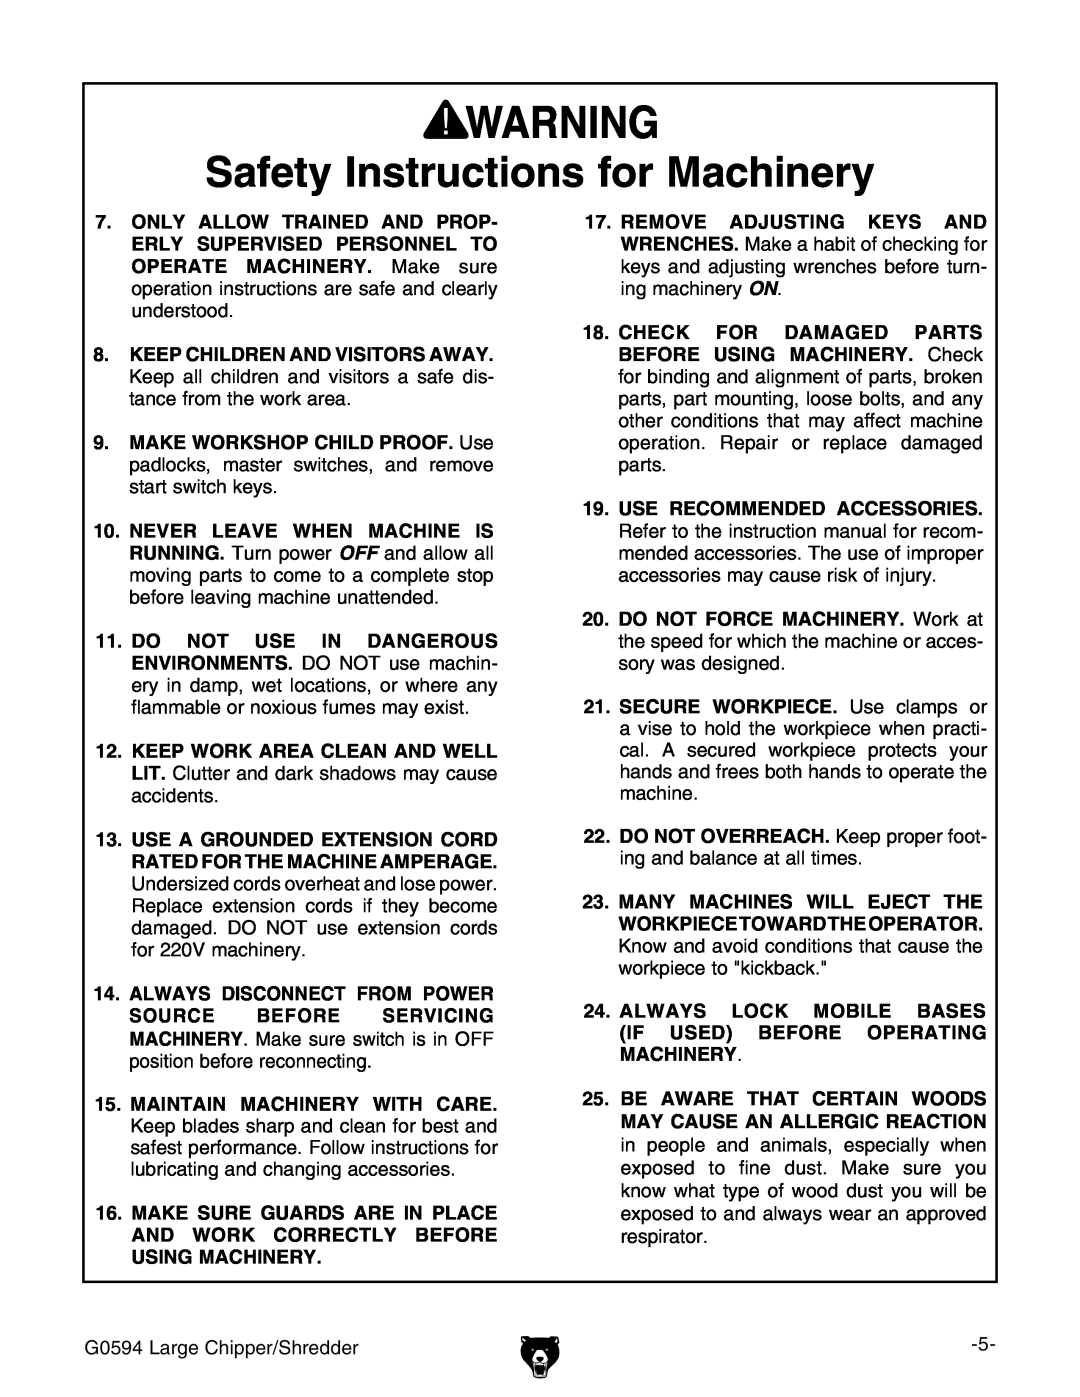 Grizzly owner manual Safety Instructions for Machinery, G0594 Large Chipper/Shredder 